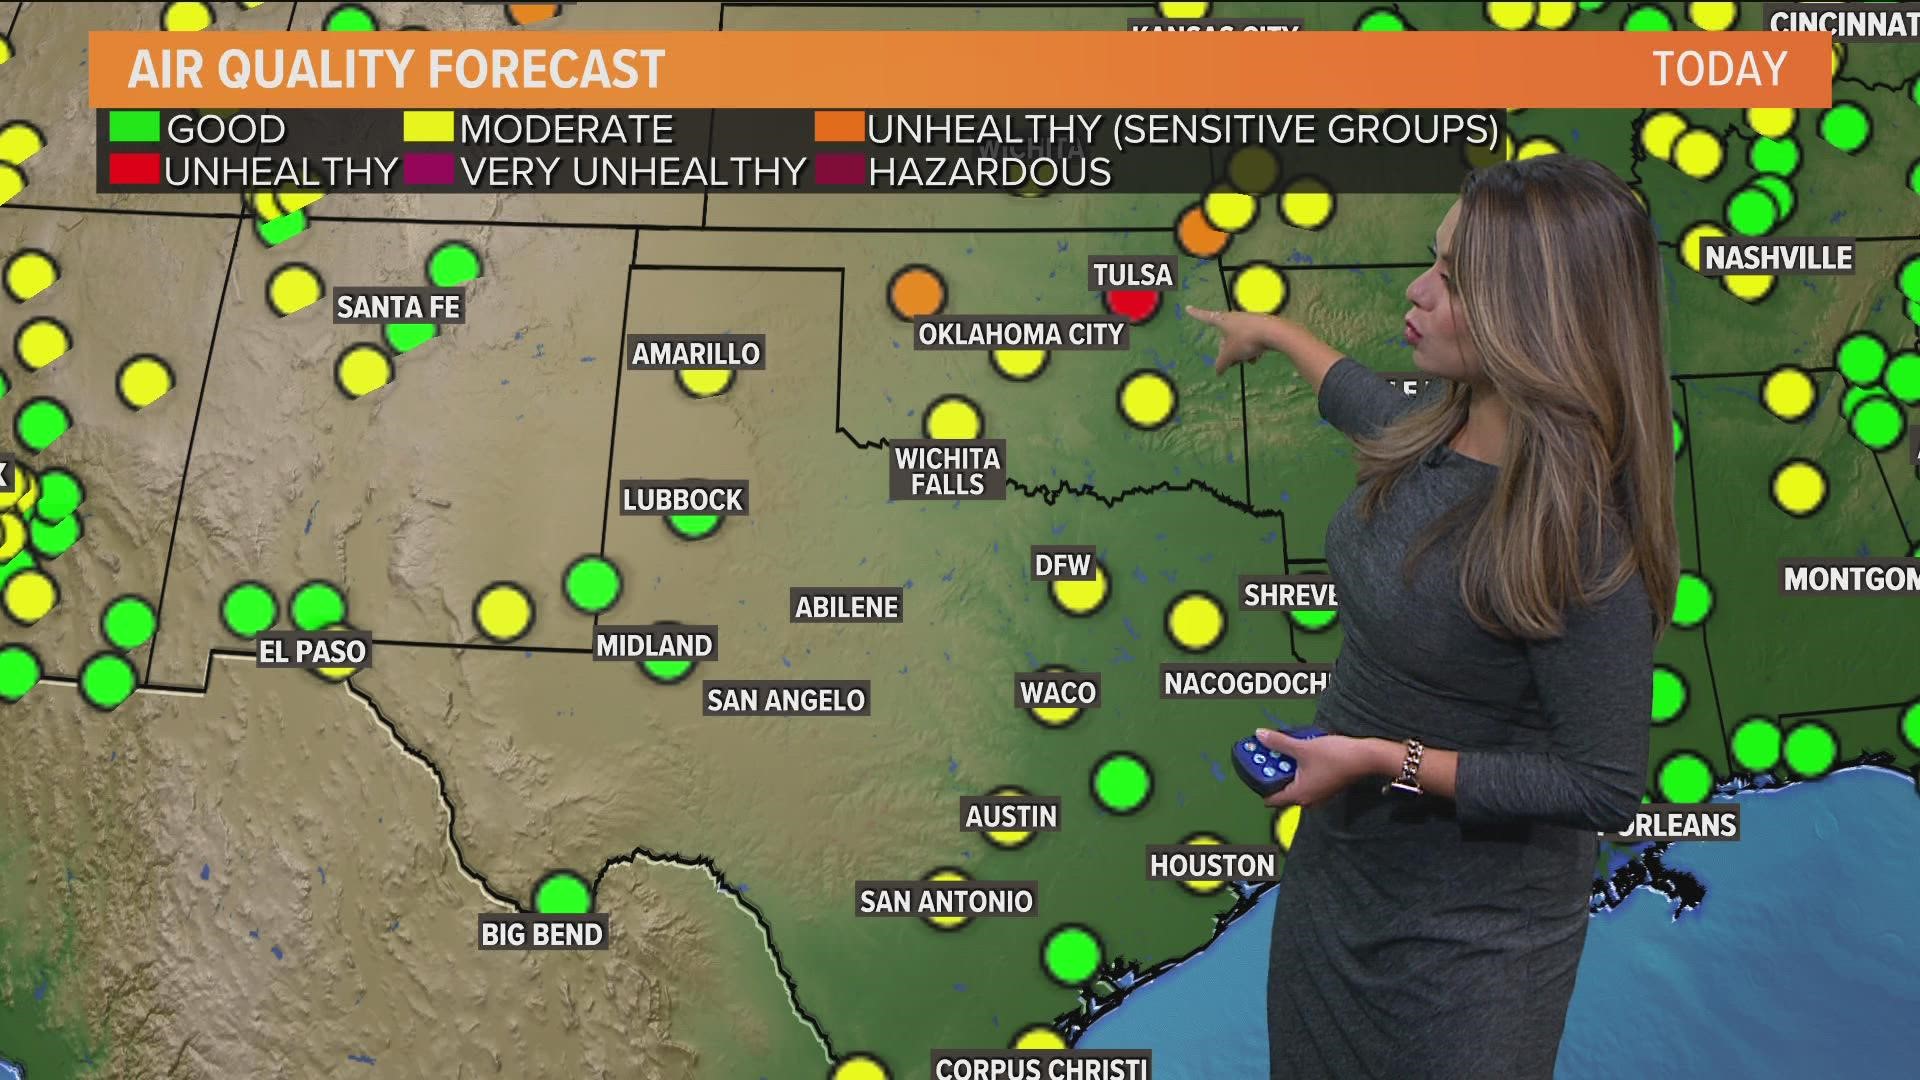 Here's a look at the air quality issues we're seeing in North Texas.